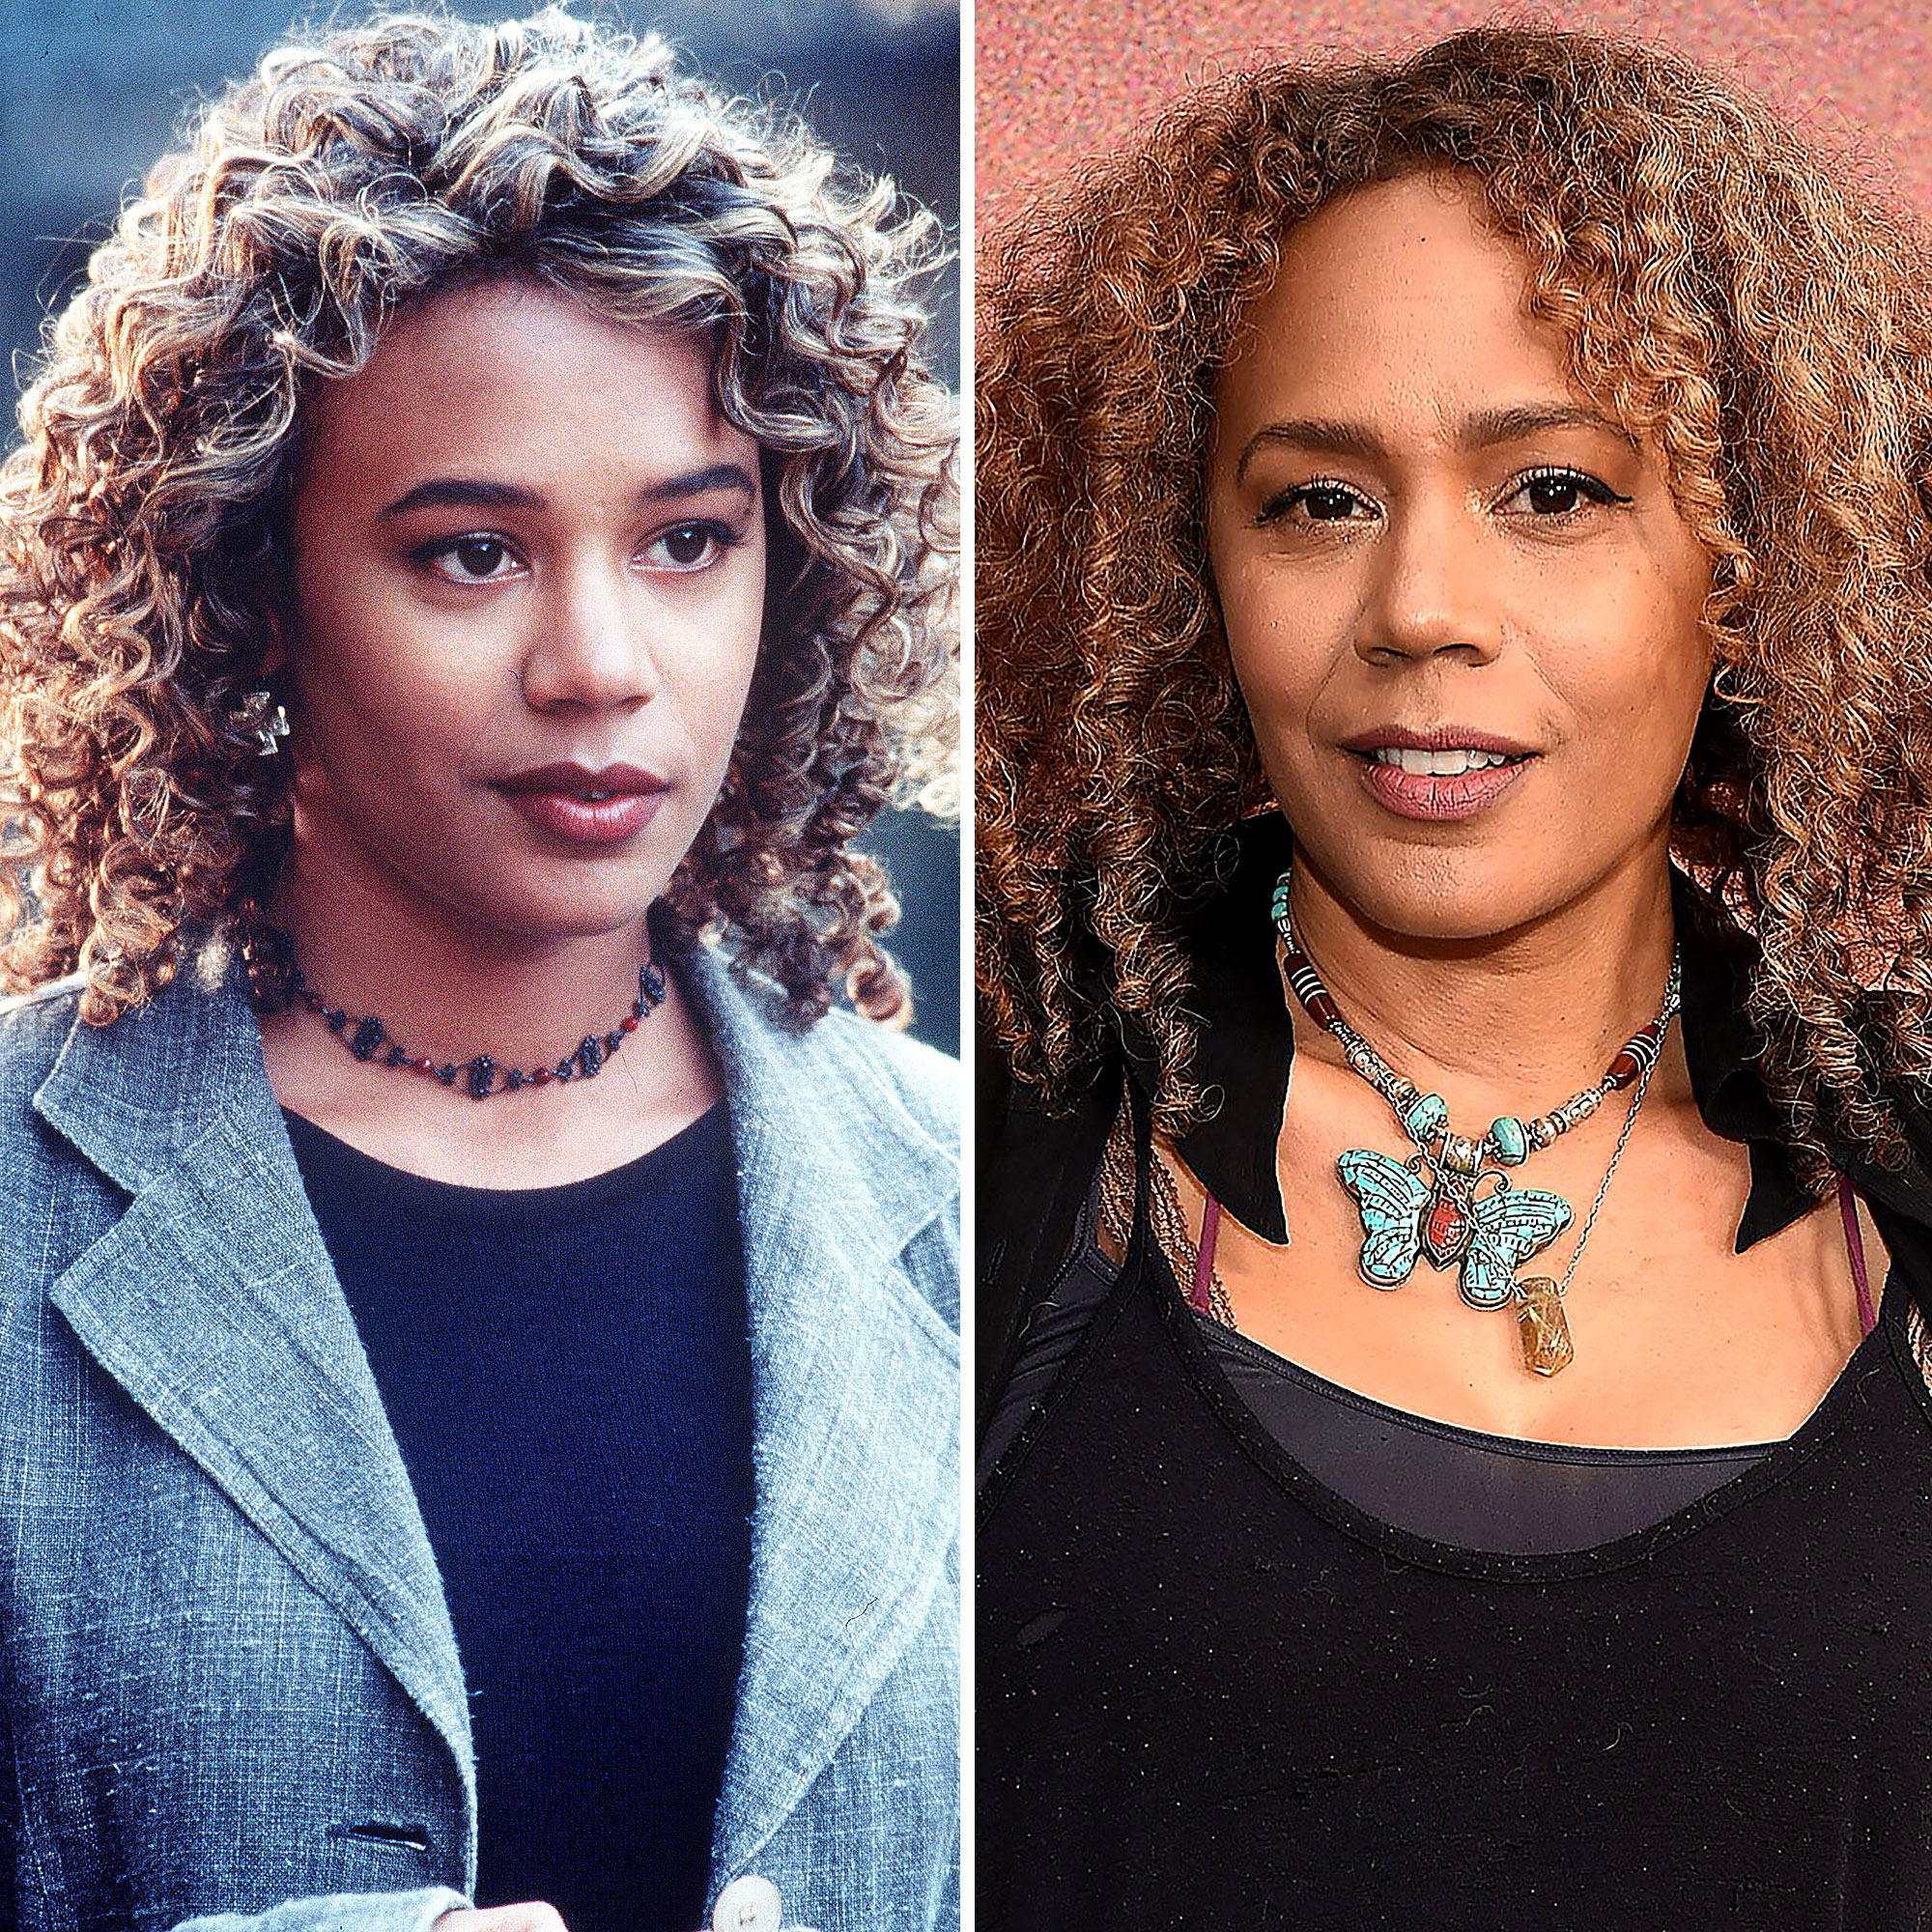 'The Craft' Movie Cast Where Are They Now?